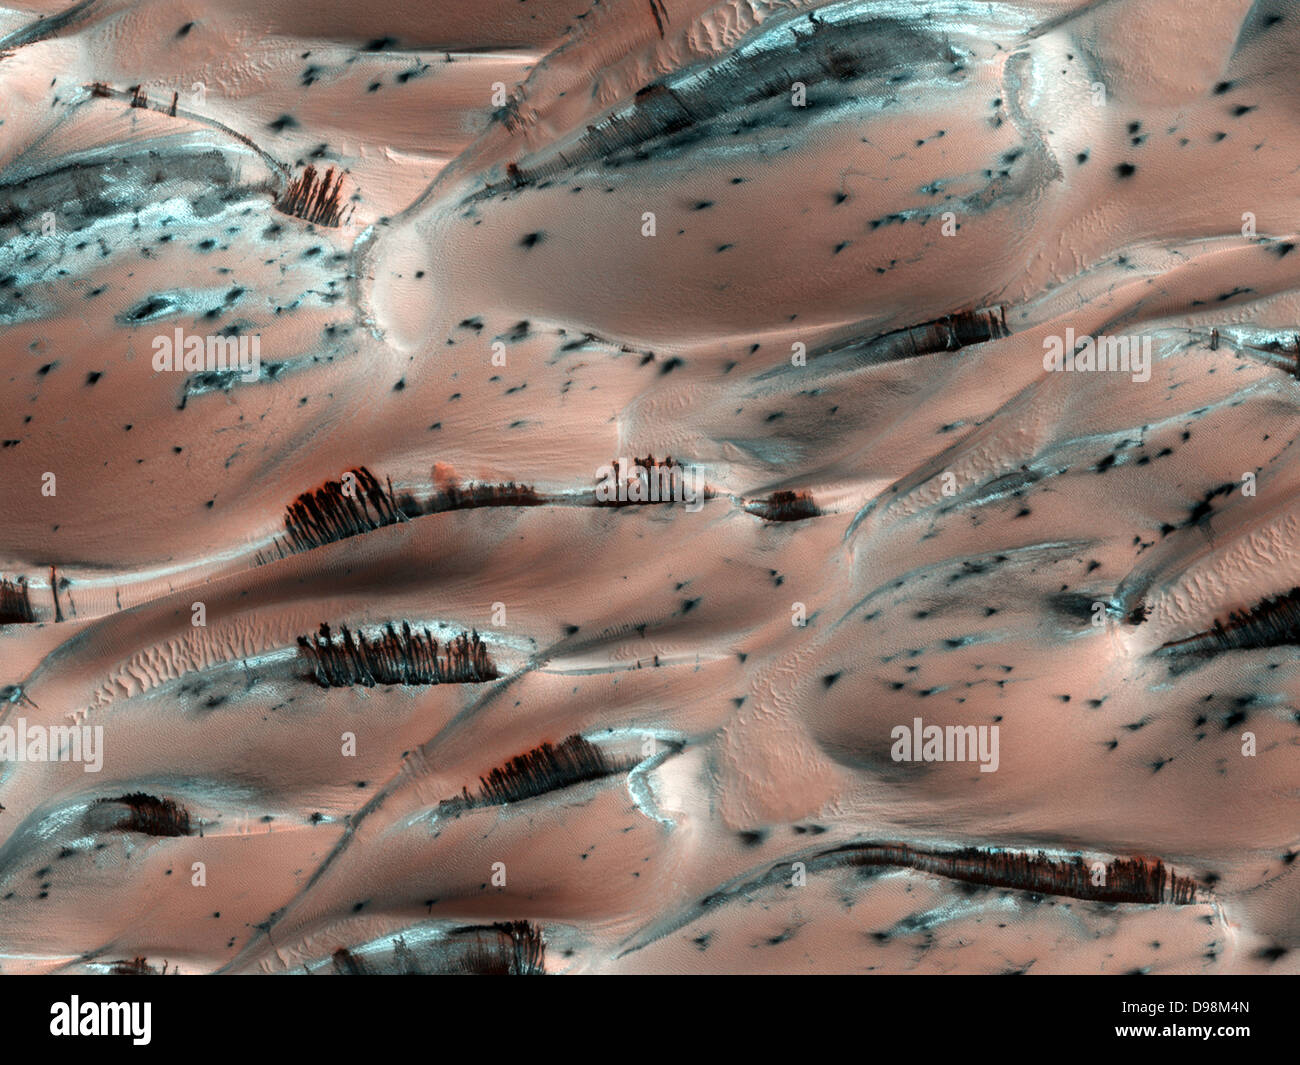 dark streaks of sediment on the downwind side of the dunes on the surface of Mars. They were created by escaping gas from the evaporating carbon dioxide ice below. The bottom of the ice melts into vapour and moves toward holes in the ice, carrying dark sediment along with it that is then deposited when the gas escapes. This image was taken by the High Resolution Imaging Science Experiment (HiRISE) camera on NASA’s Mars Reconnaissance Orbiter in April 2008. Stock Photo